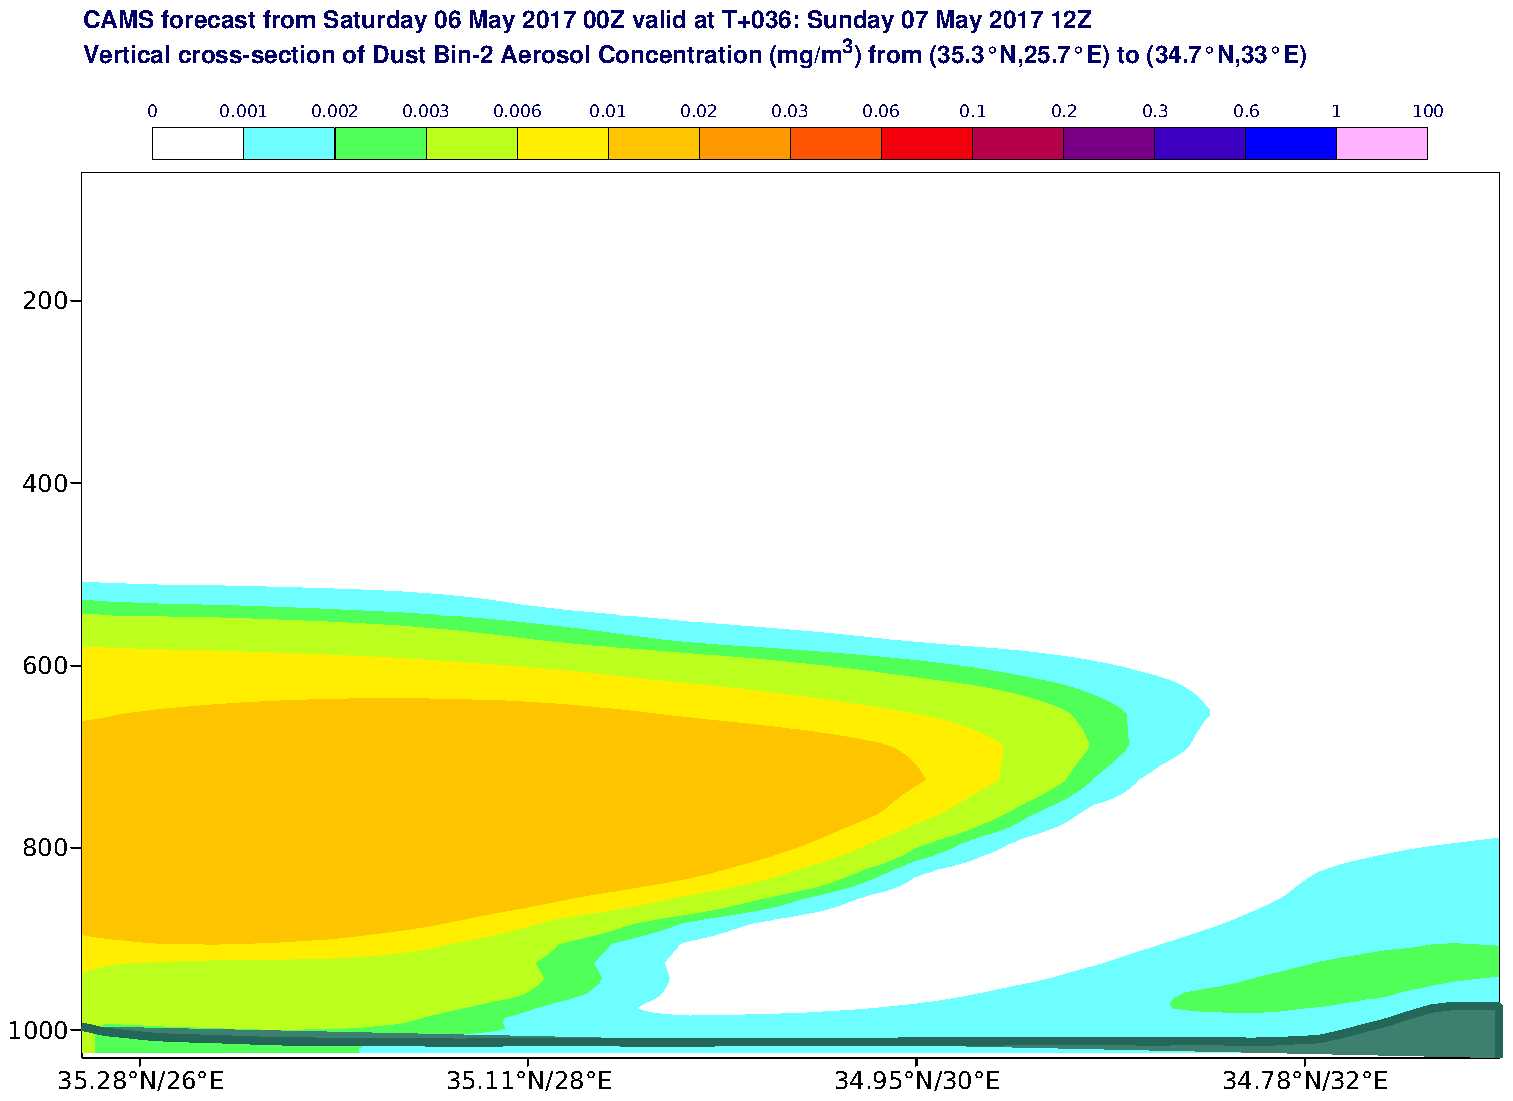 Vertical cross-section of Dust Bin-2 Aerosol Concentration (mg/m3) valid at T36 - 2017-05-07 12:00